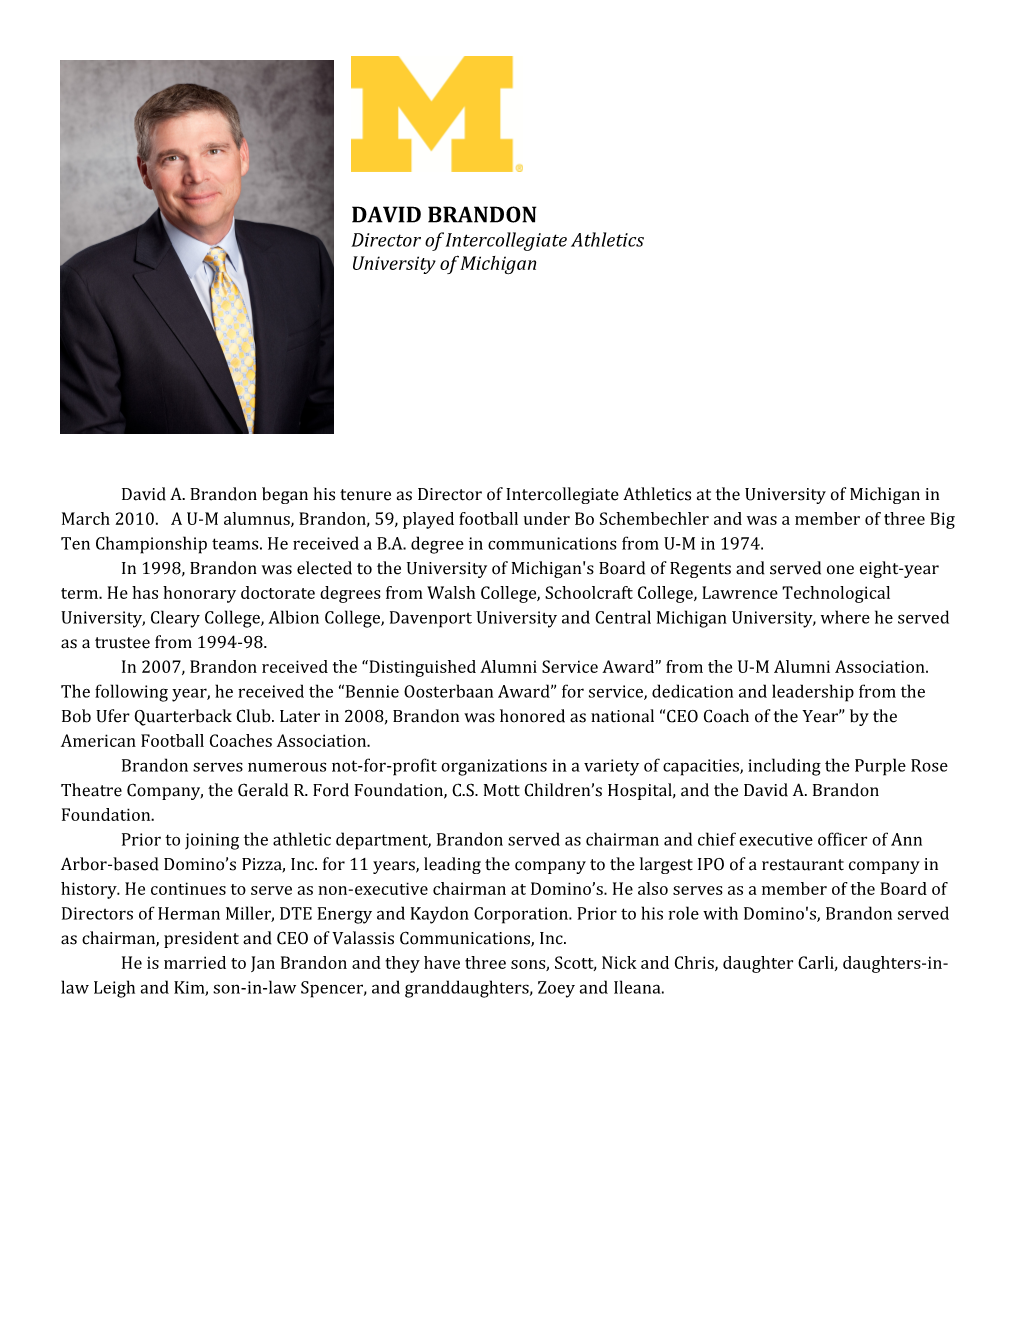 In 1998, Brandon Was Elected to the University of Michigan's Board of Regents and Served